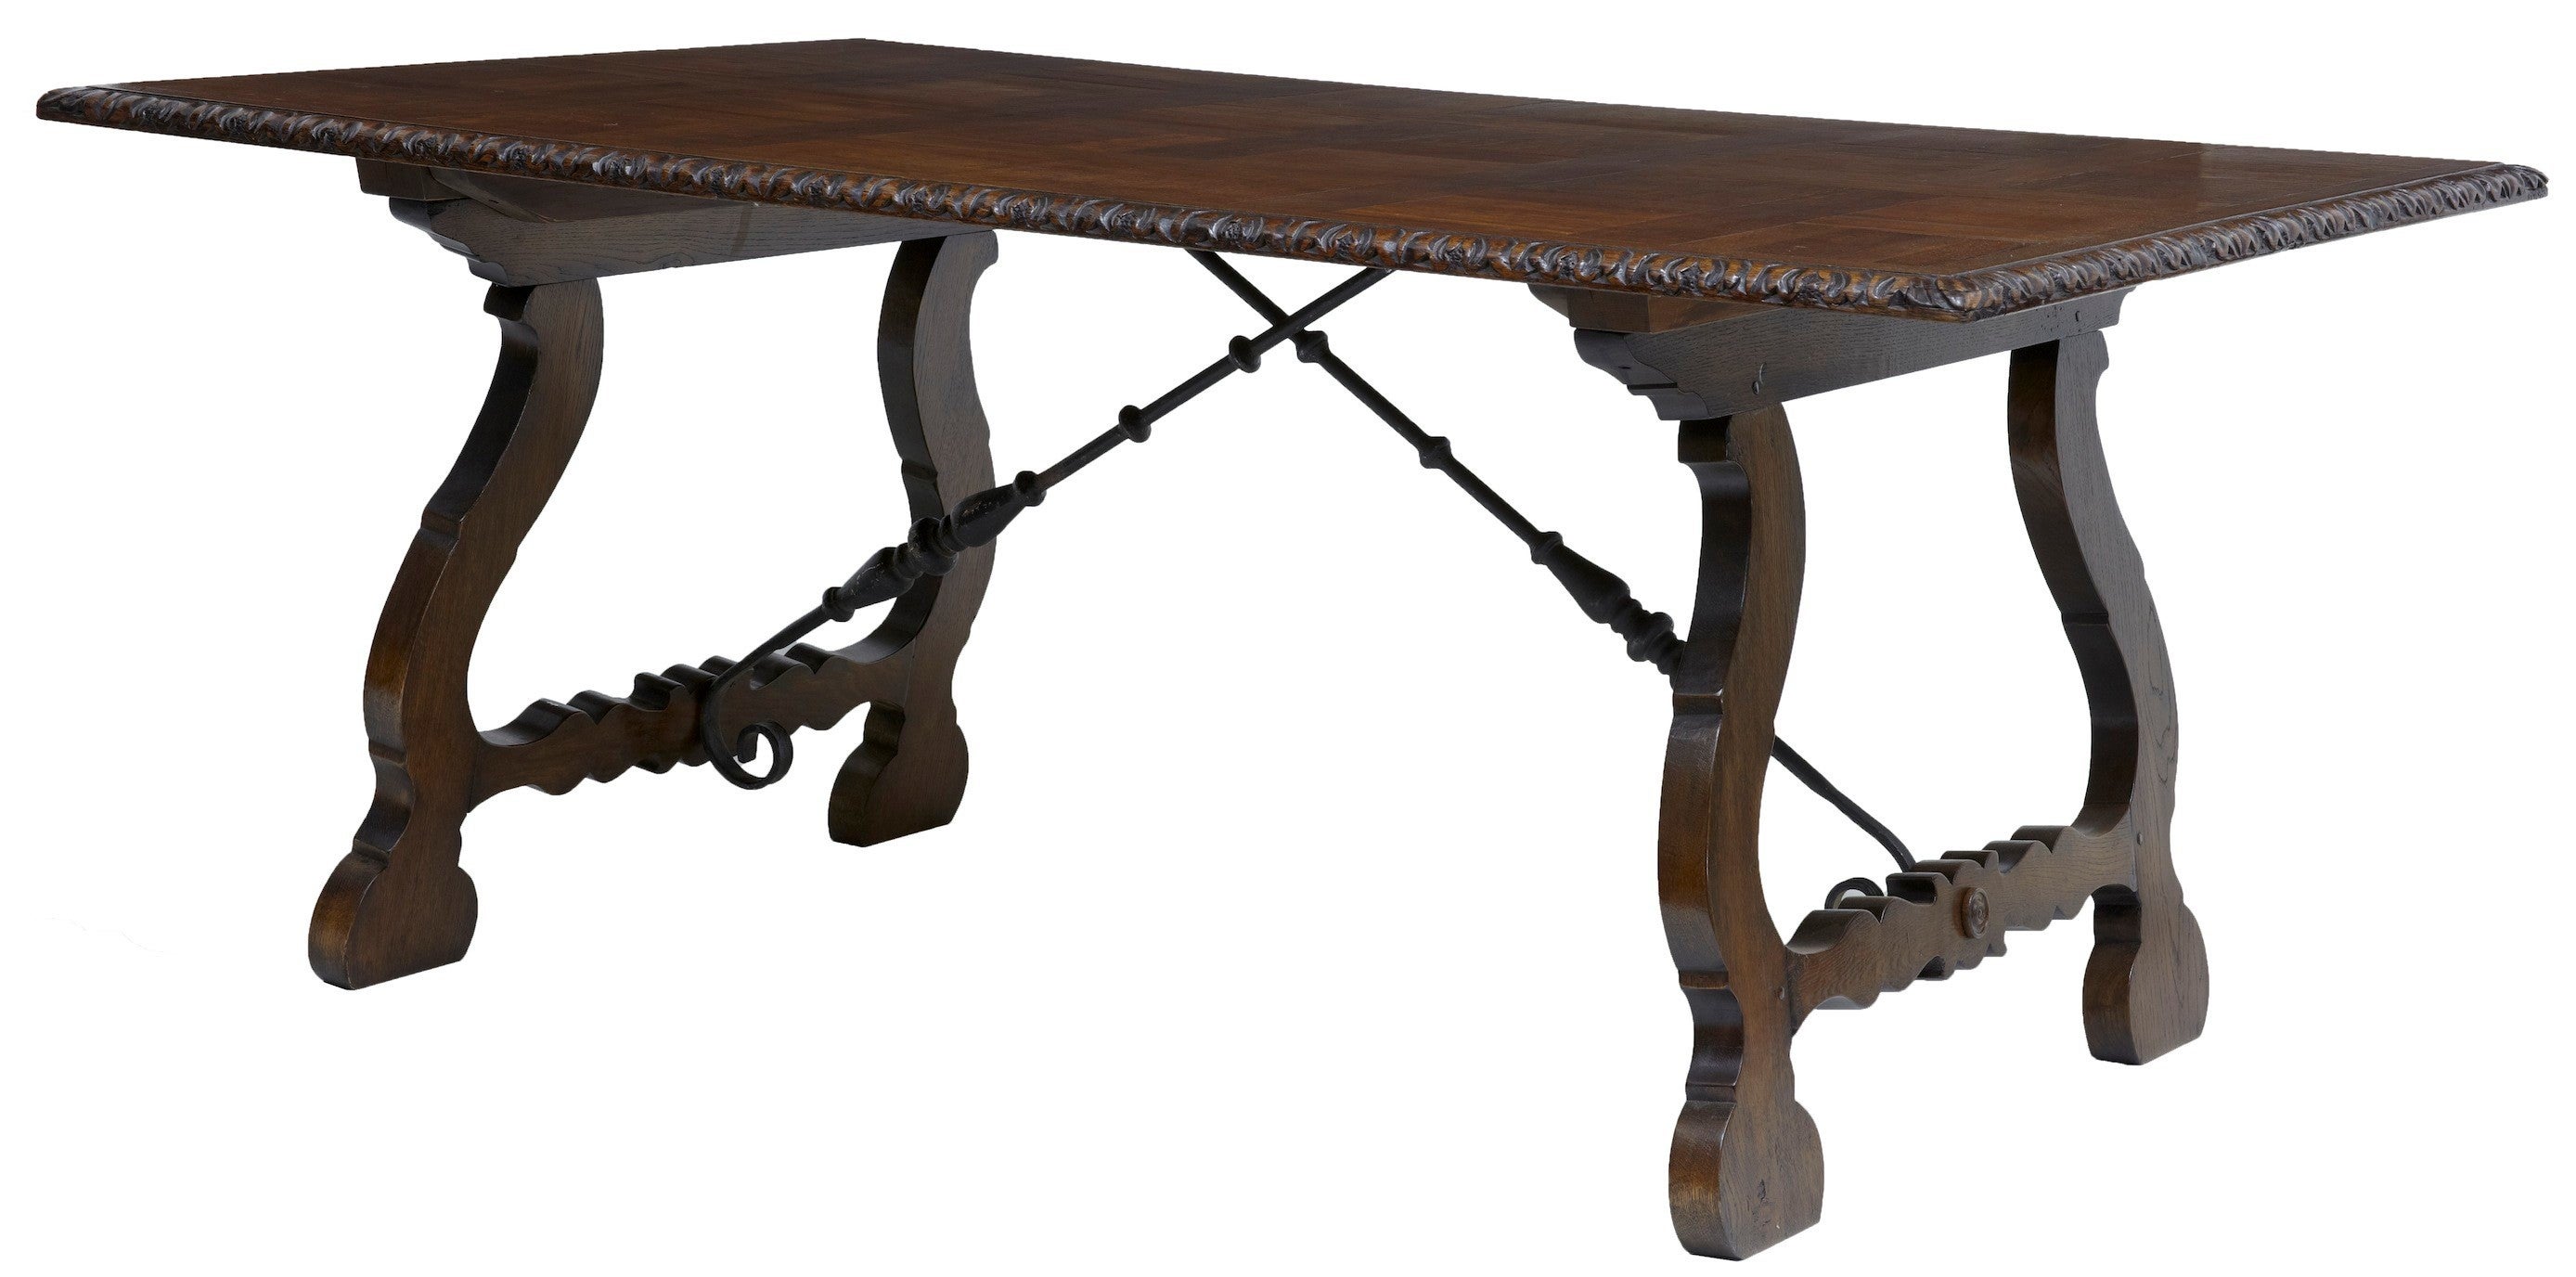 Spanish Influenced Parquetry Top Refectory Table